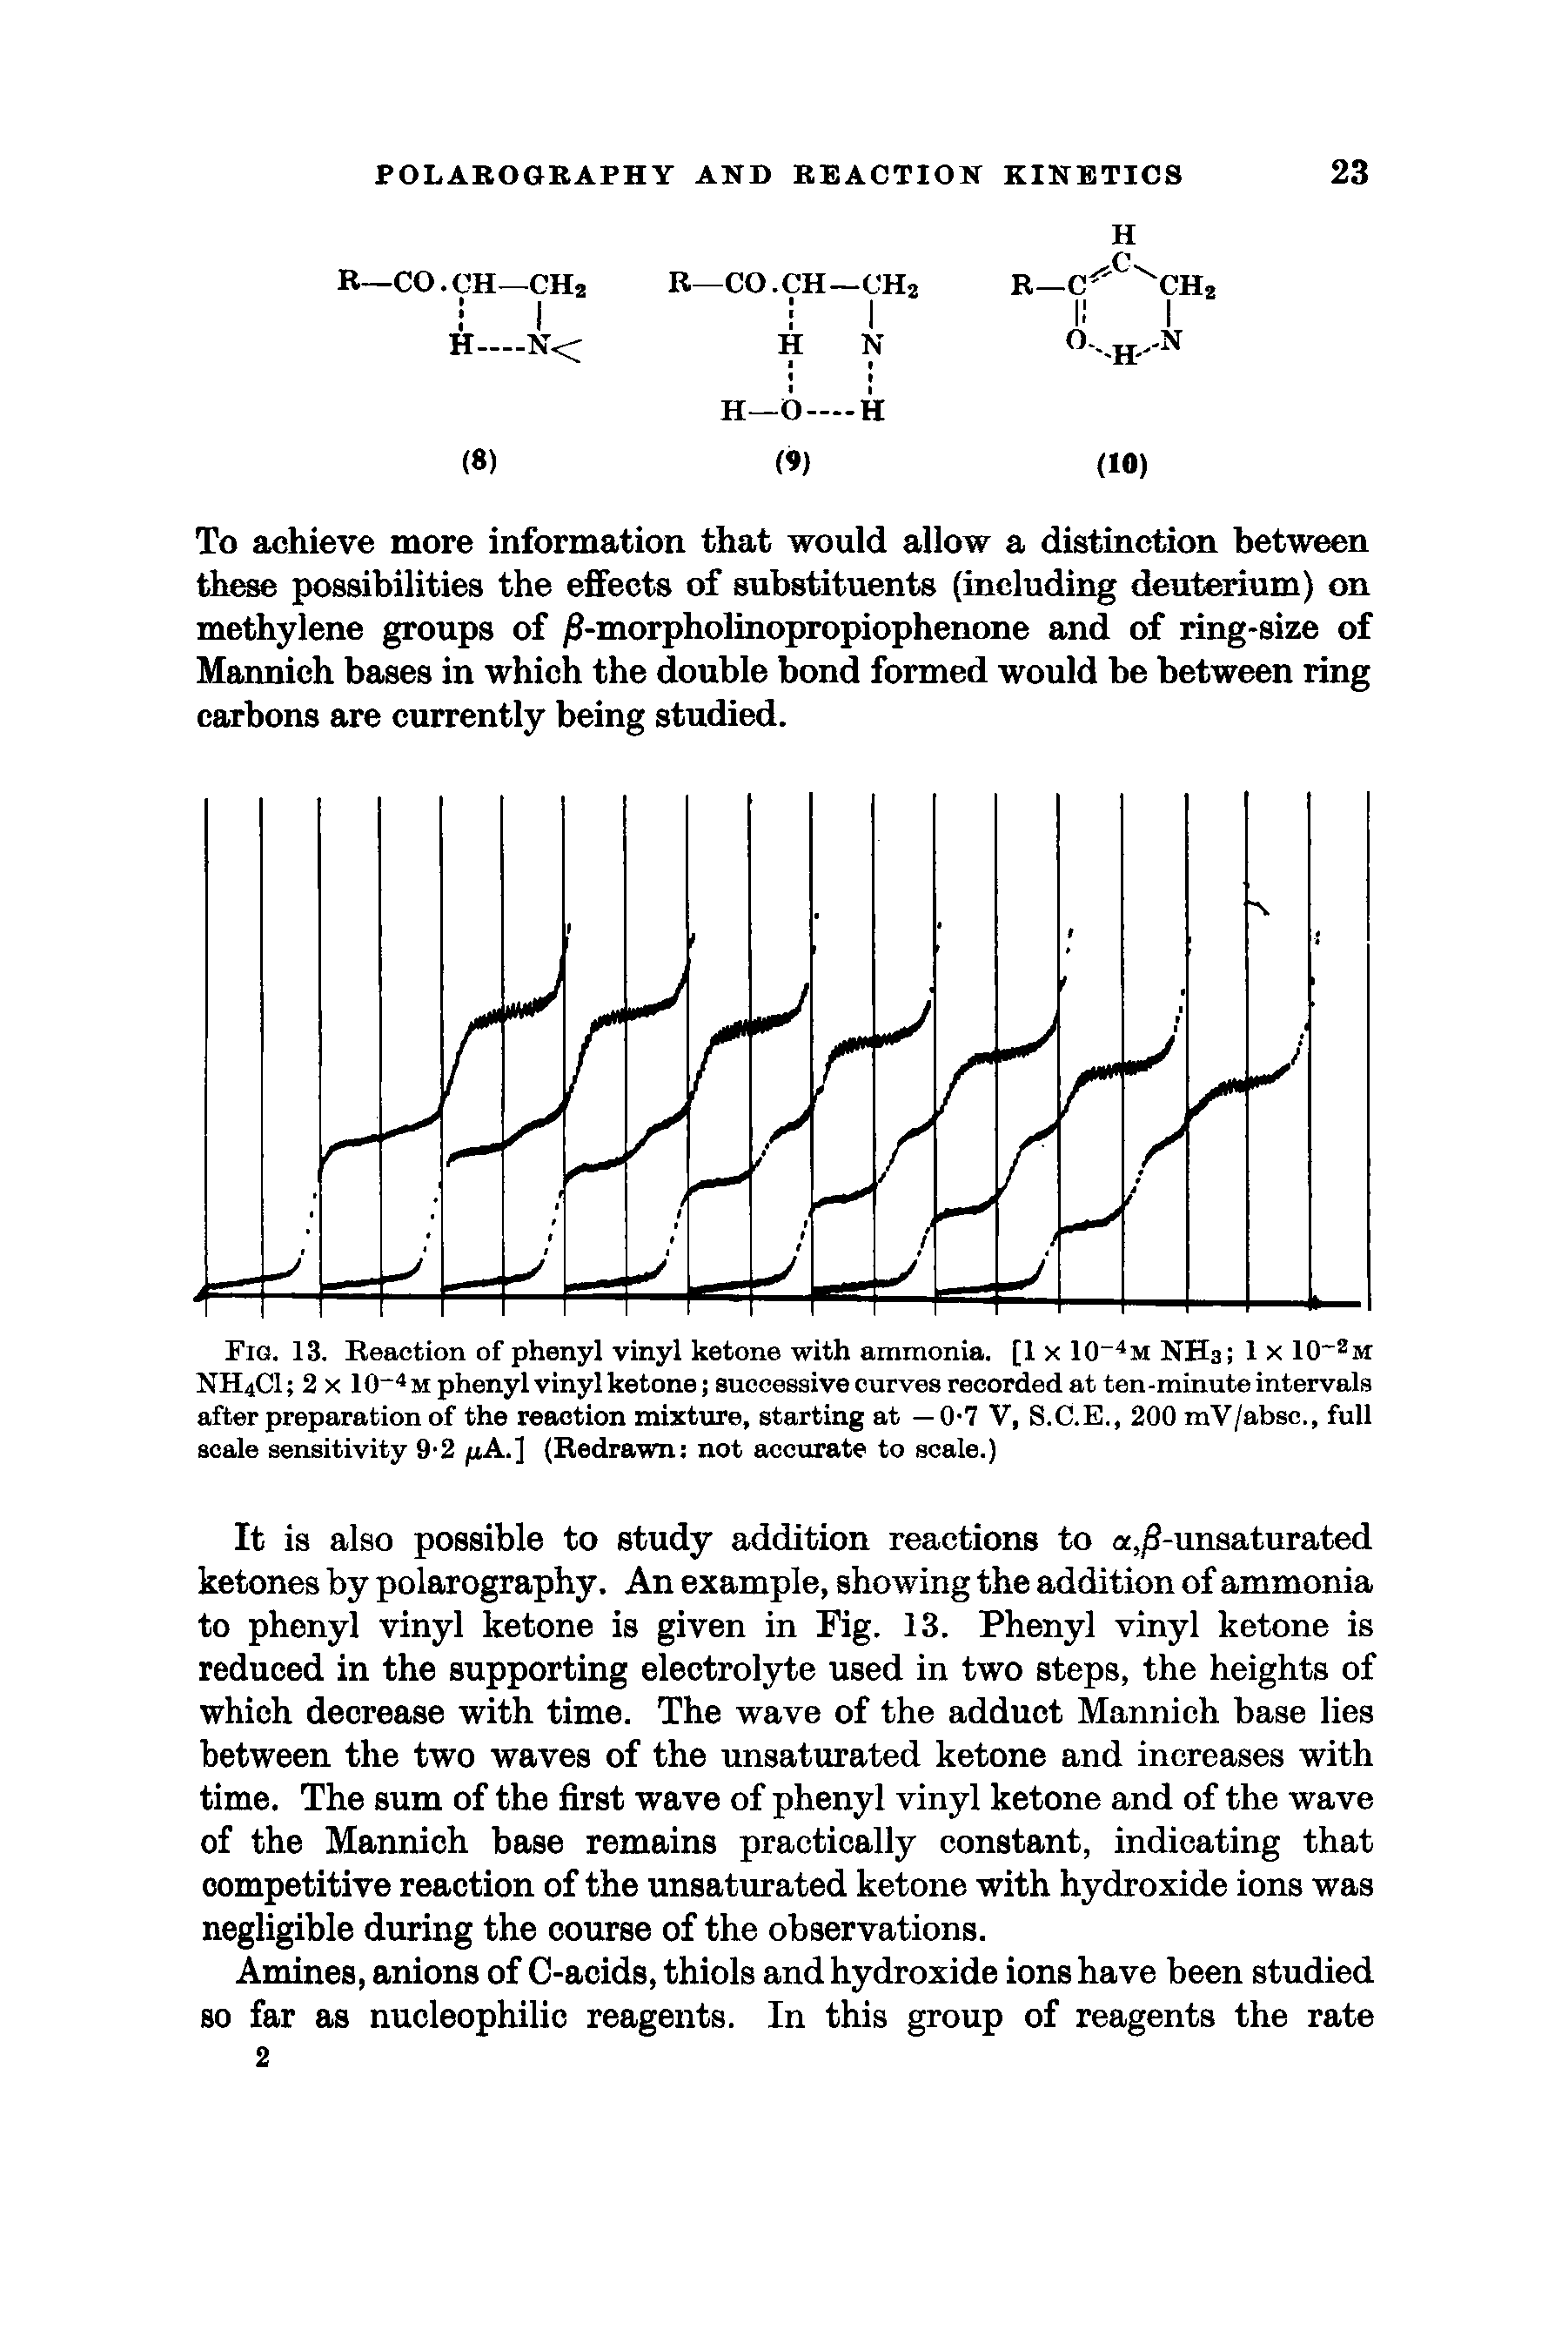 Fig. 13. Reaction of phenyl vinyl ketone with ammonia, [lx 10 M NHa 1 x 10 M NH4CI 2 X 10 m phenyl vinyl ketone successive curves recorded at ten-minute intervals after preparation of the reaction mixture, starting at —0-7 V, S.C.E., 200 mV/absc., full scale sensitivity 9 2 pA.] (Redrawn not accurate to scale.)...